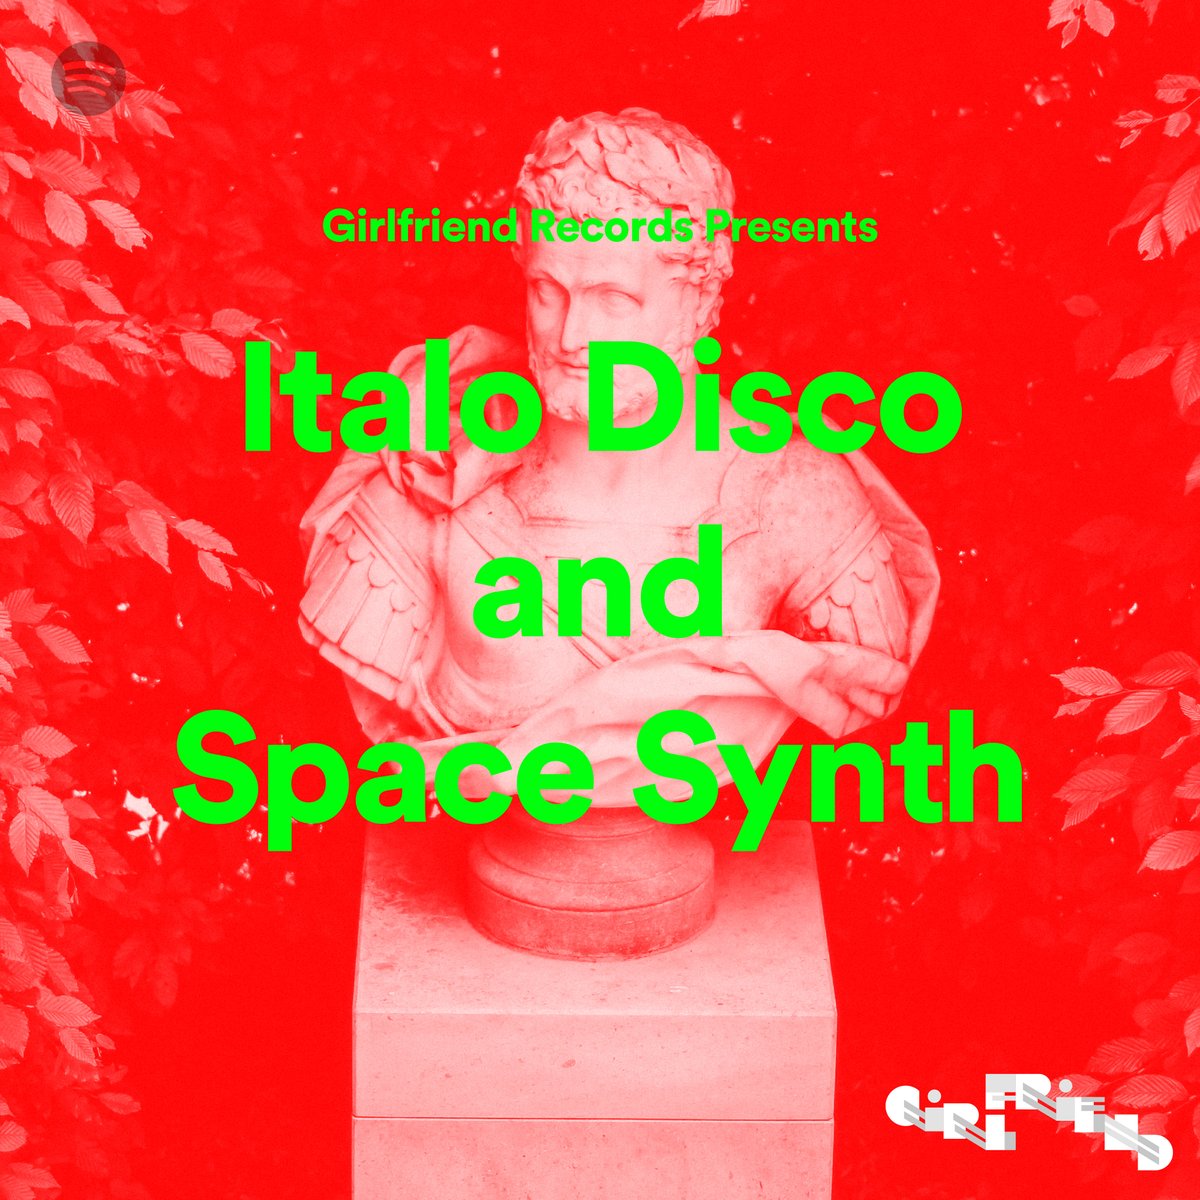 Started a cool Italo Disco / Spacesynth playlist. Trying to keep this one short, focused, and every changing. If you have any suggestions or submissions, please comment here!
open.spotify.com/playlist/2aNt0…
#synthwave #italodisco #italo #spacesynth #disco #playlist #spotify